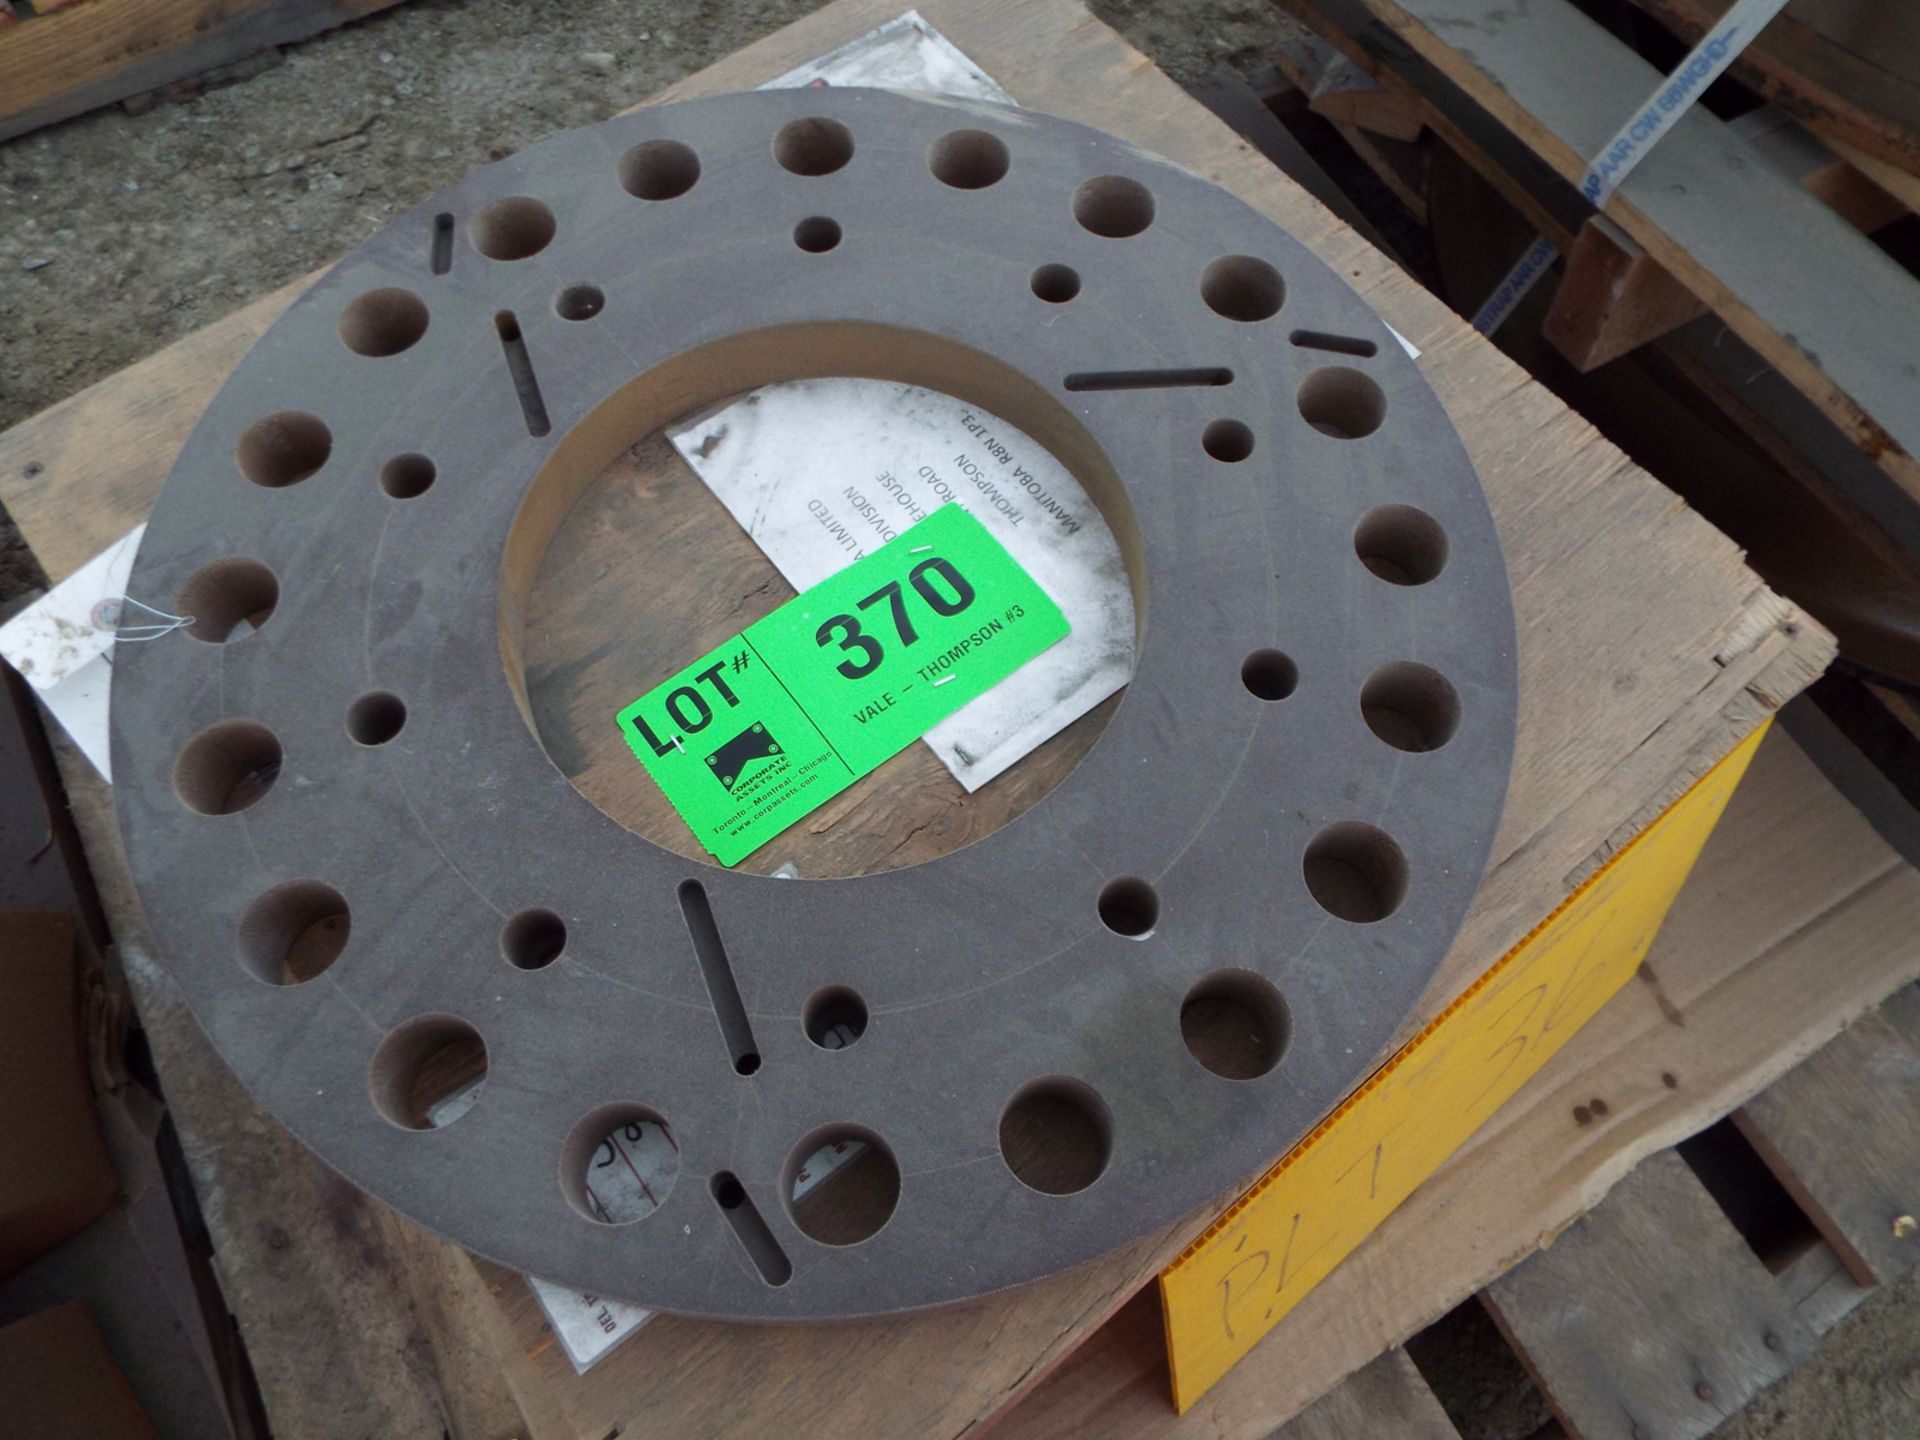 LOT/ CONTENTS OF SKID - (1) VACUUM HEAD WEAR PLATE; (1) 1-1/4" PITCH DIA., RIGHT HAND, SINGLE THREAD